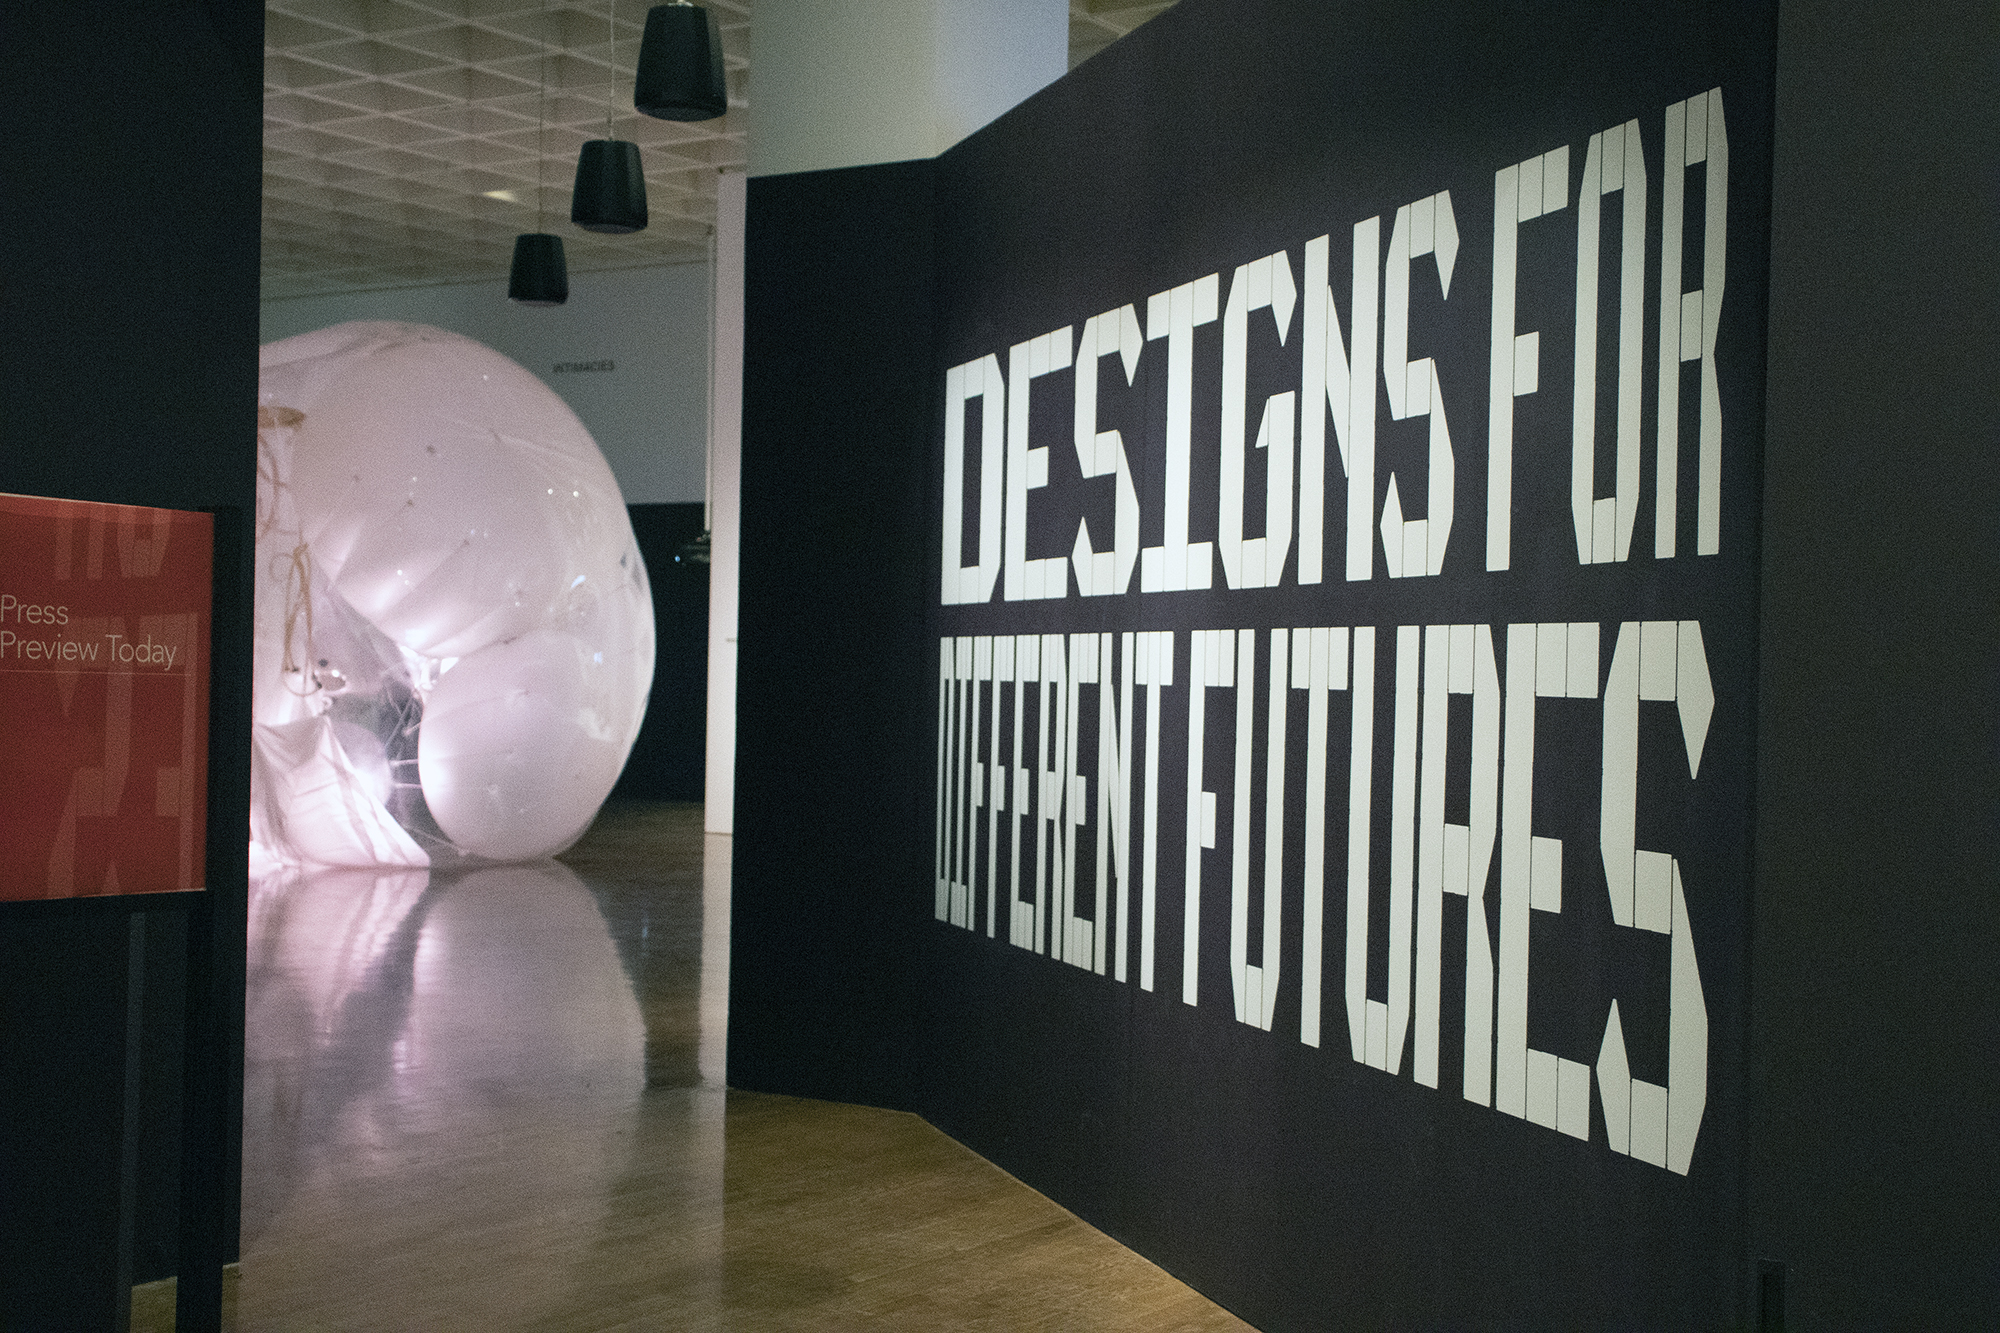 Entryway to the Designs for Different Futures exhibit, text written in large letters on the wall